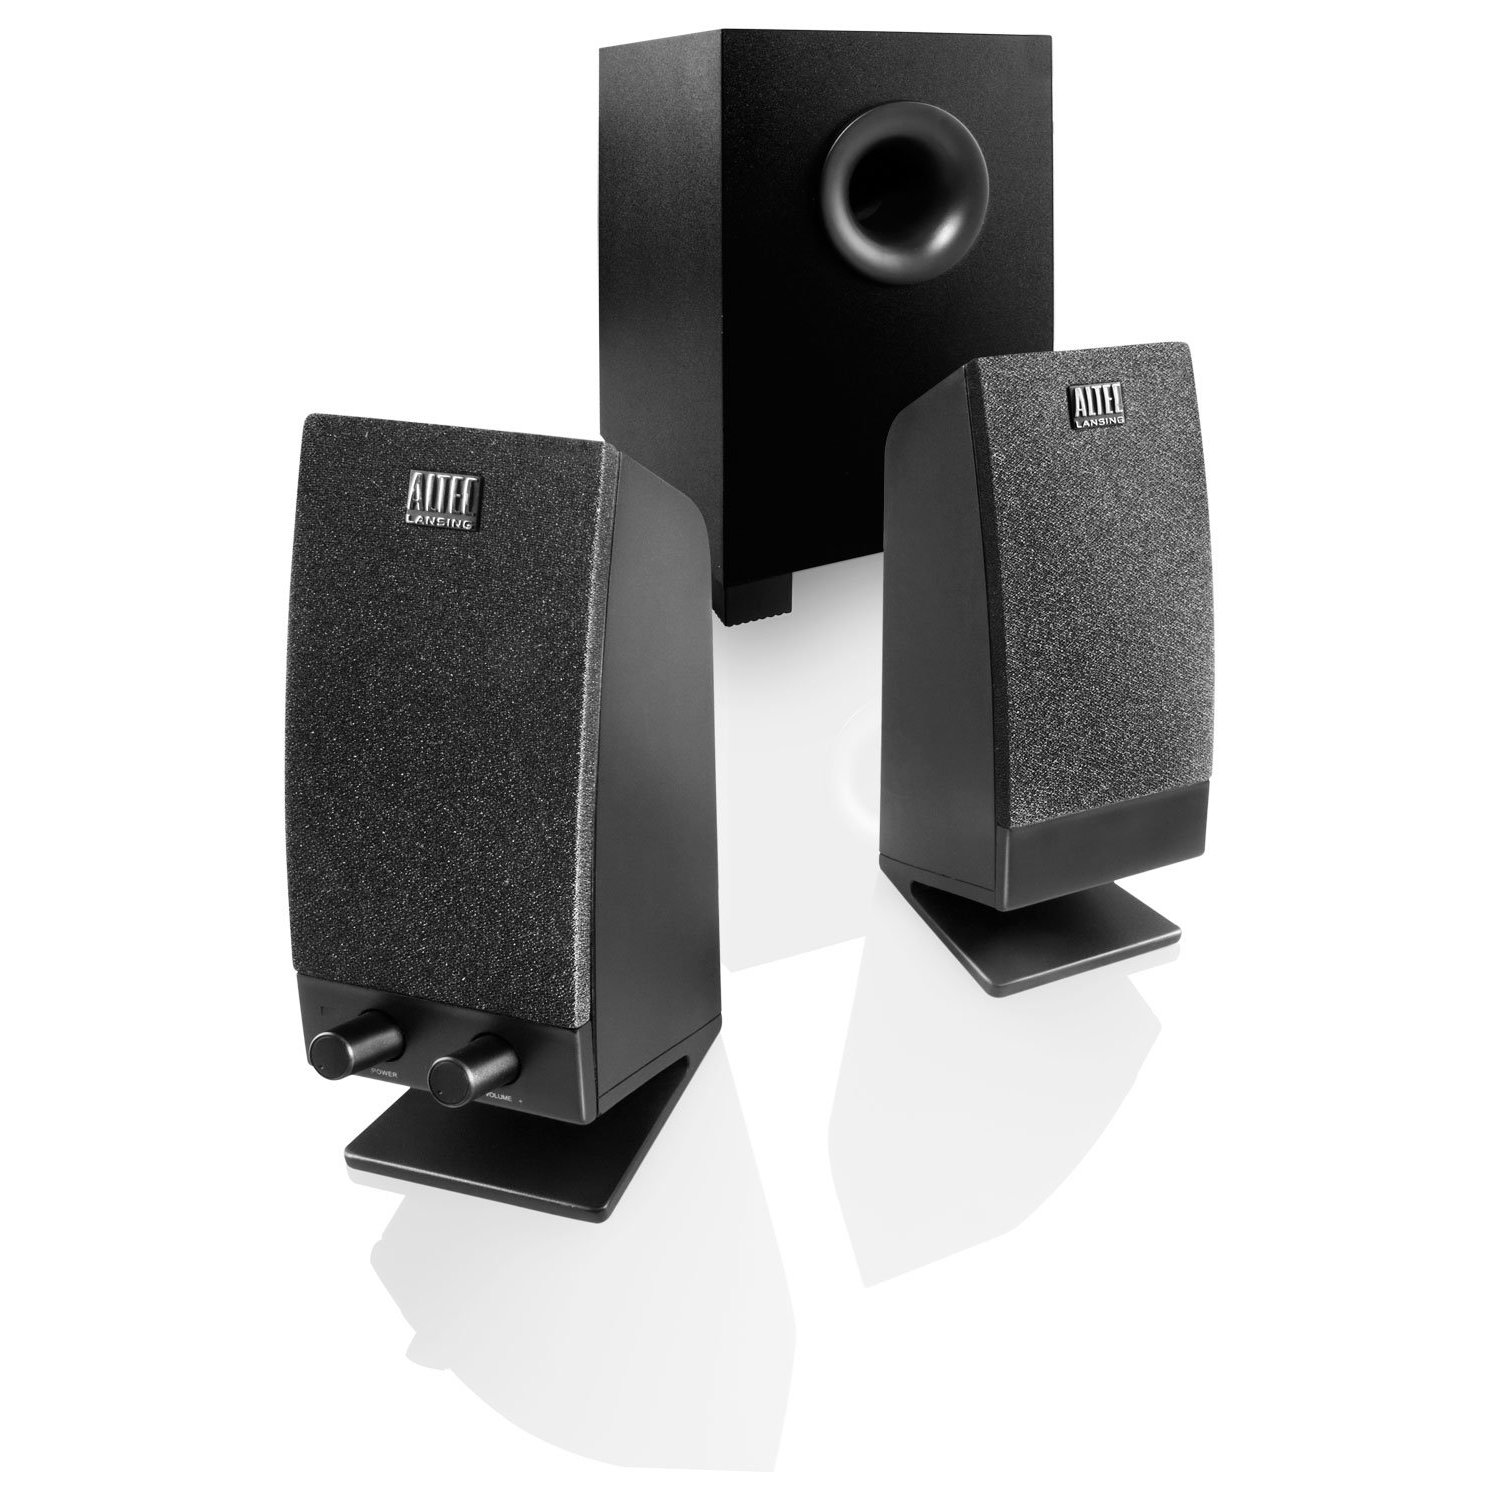 Alteclansing computer speakers drivers for mac